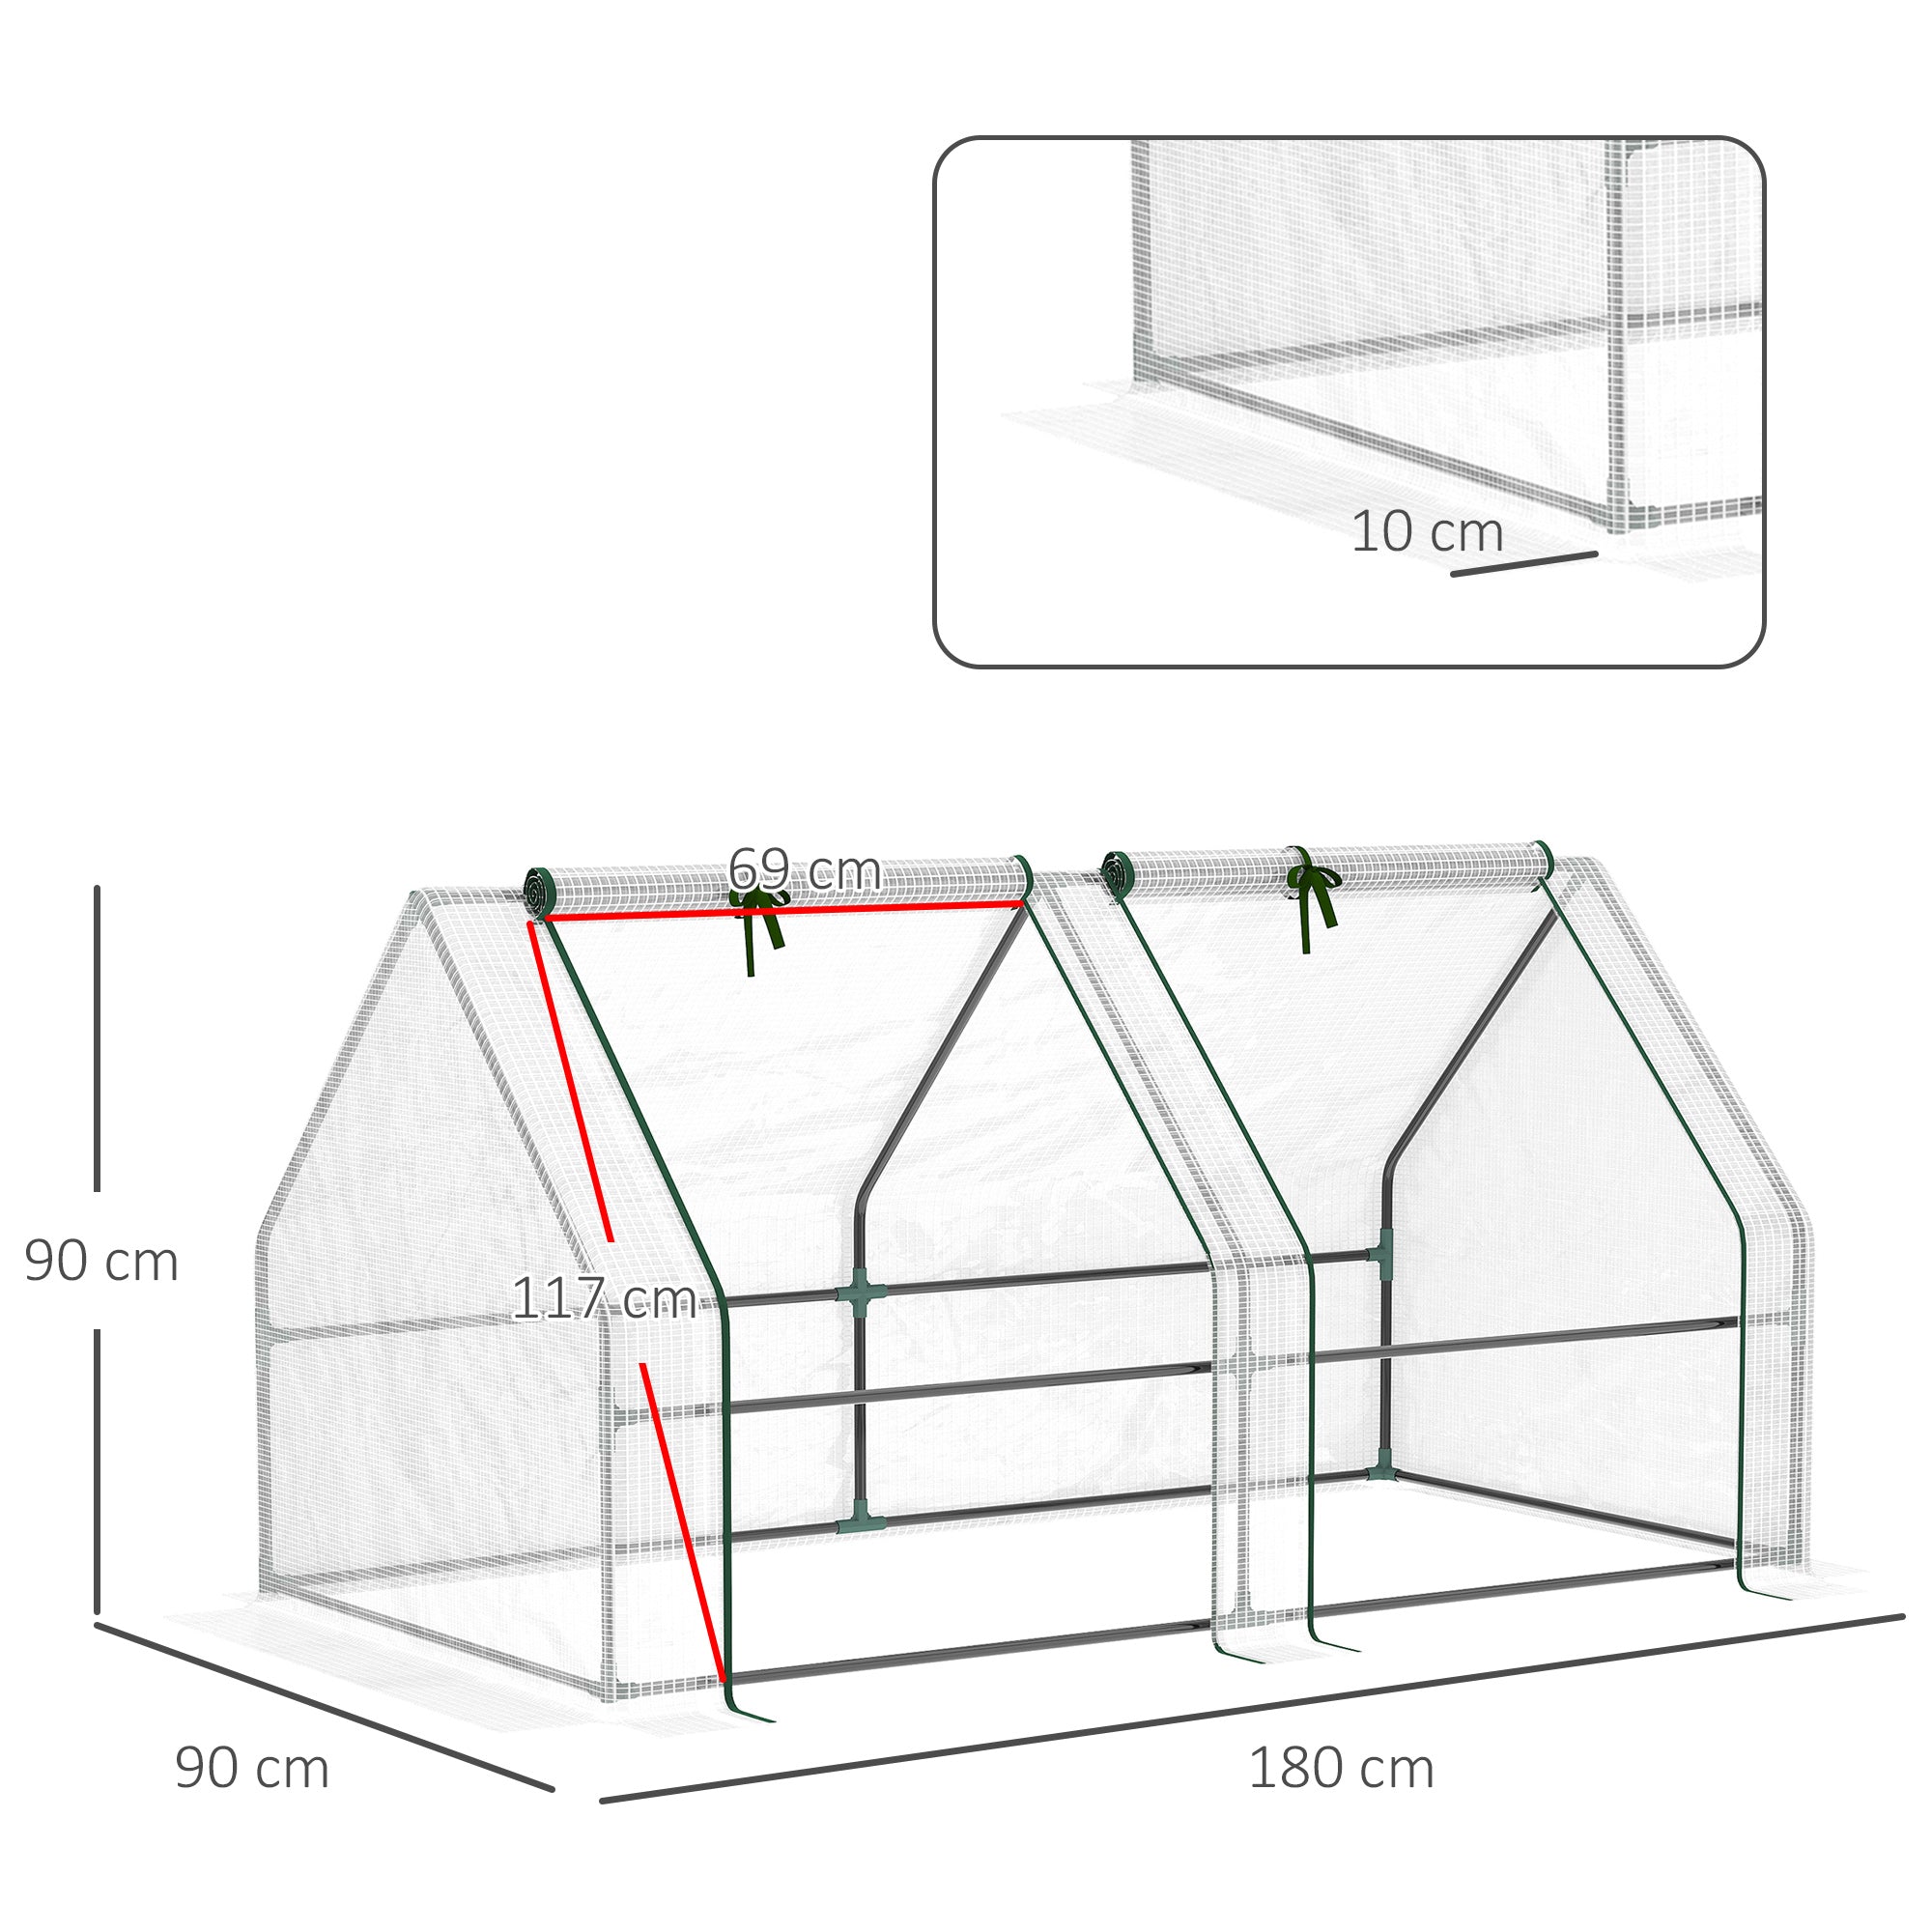 Outsunny Mini Small Greenhouse with Steel Frame & PE Cover & Zippered Window Poly tunnel Steeple for Plants Vegetables, 180 x 90 x 90 cm, White